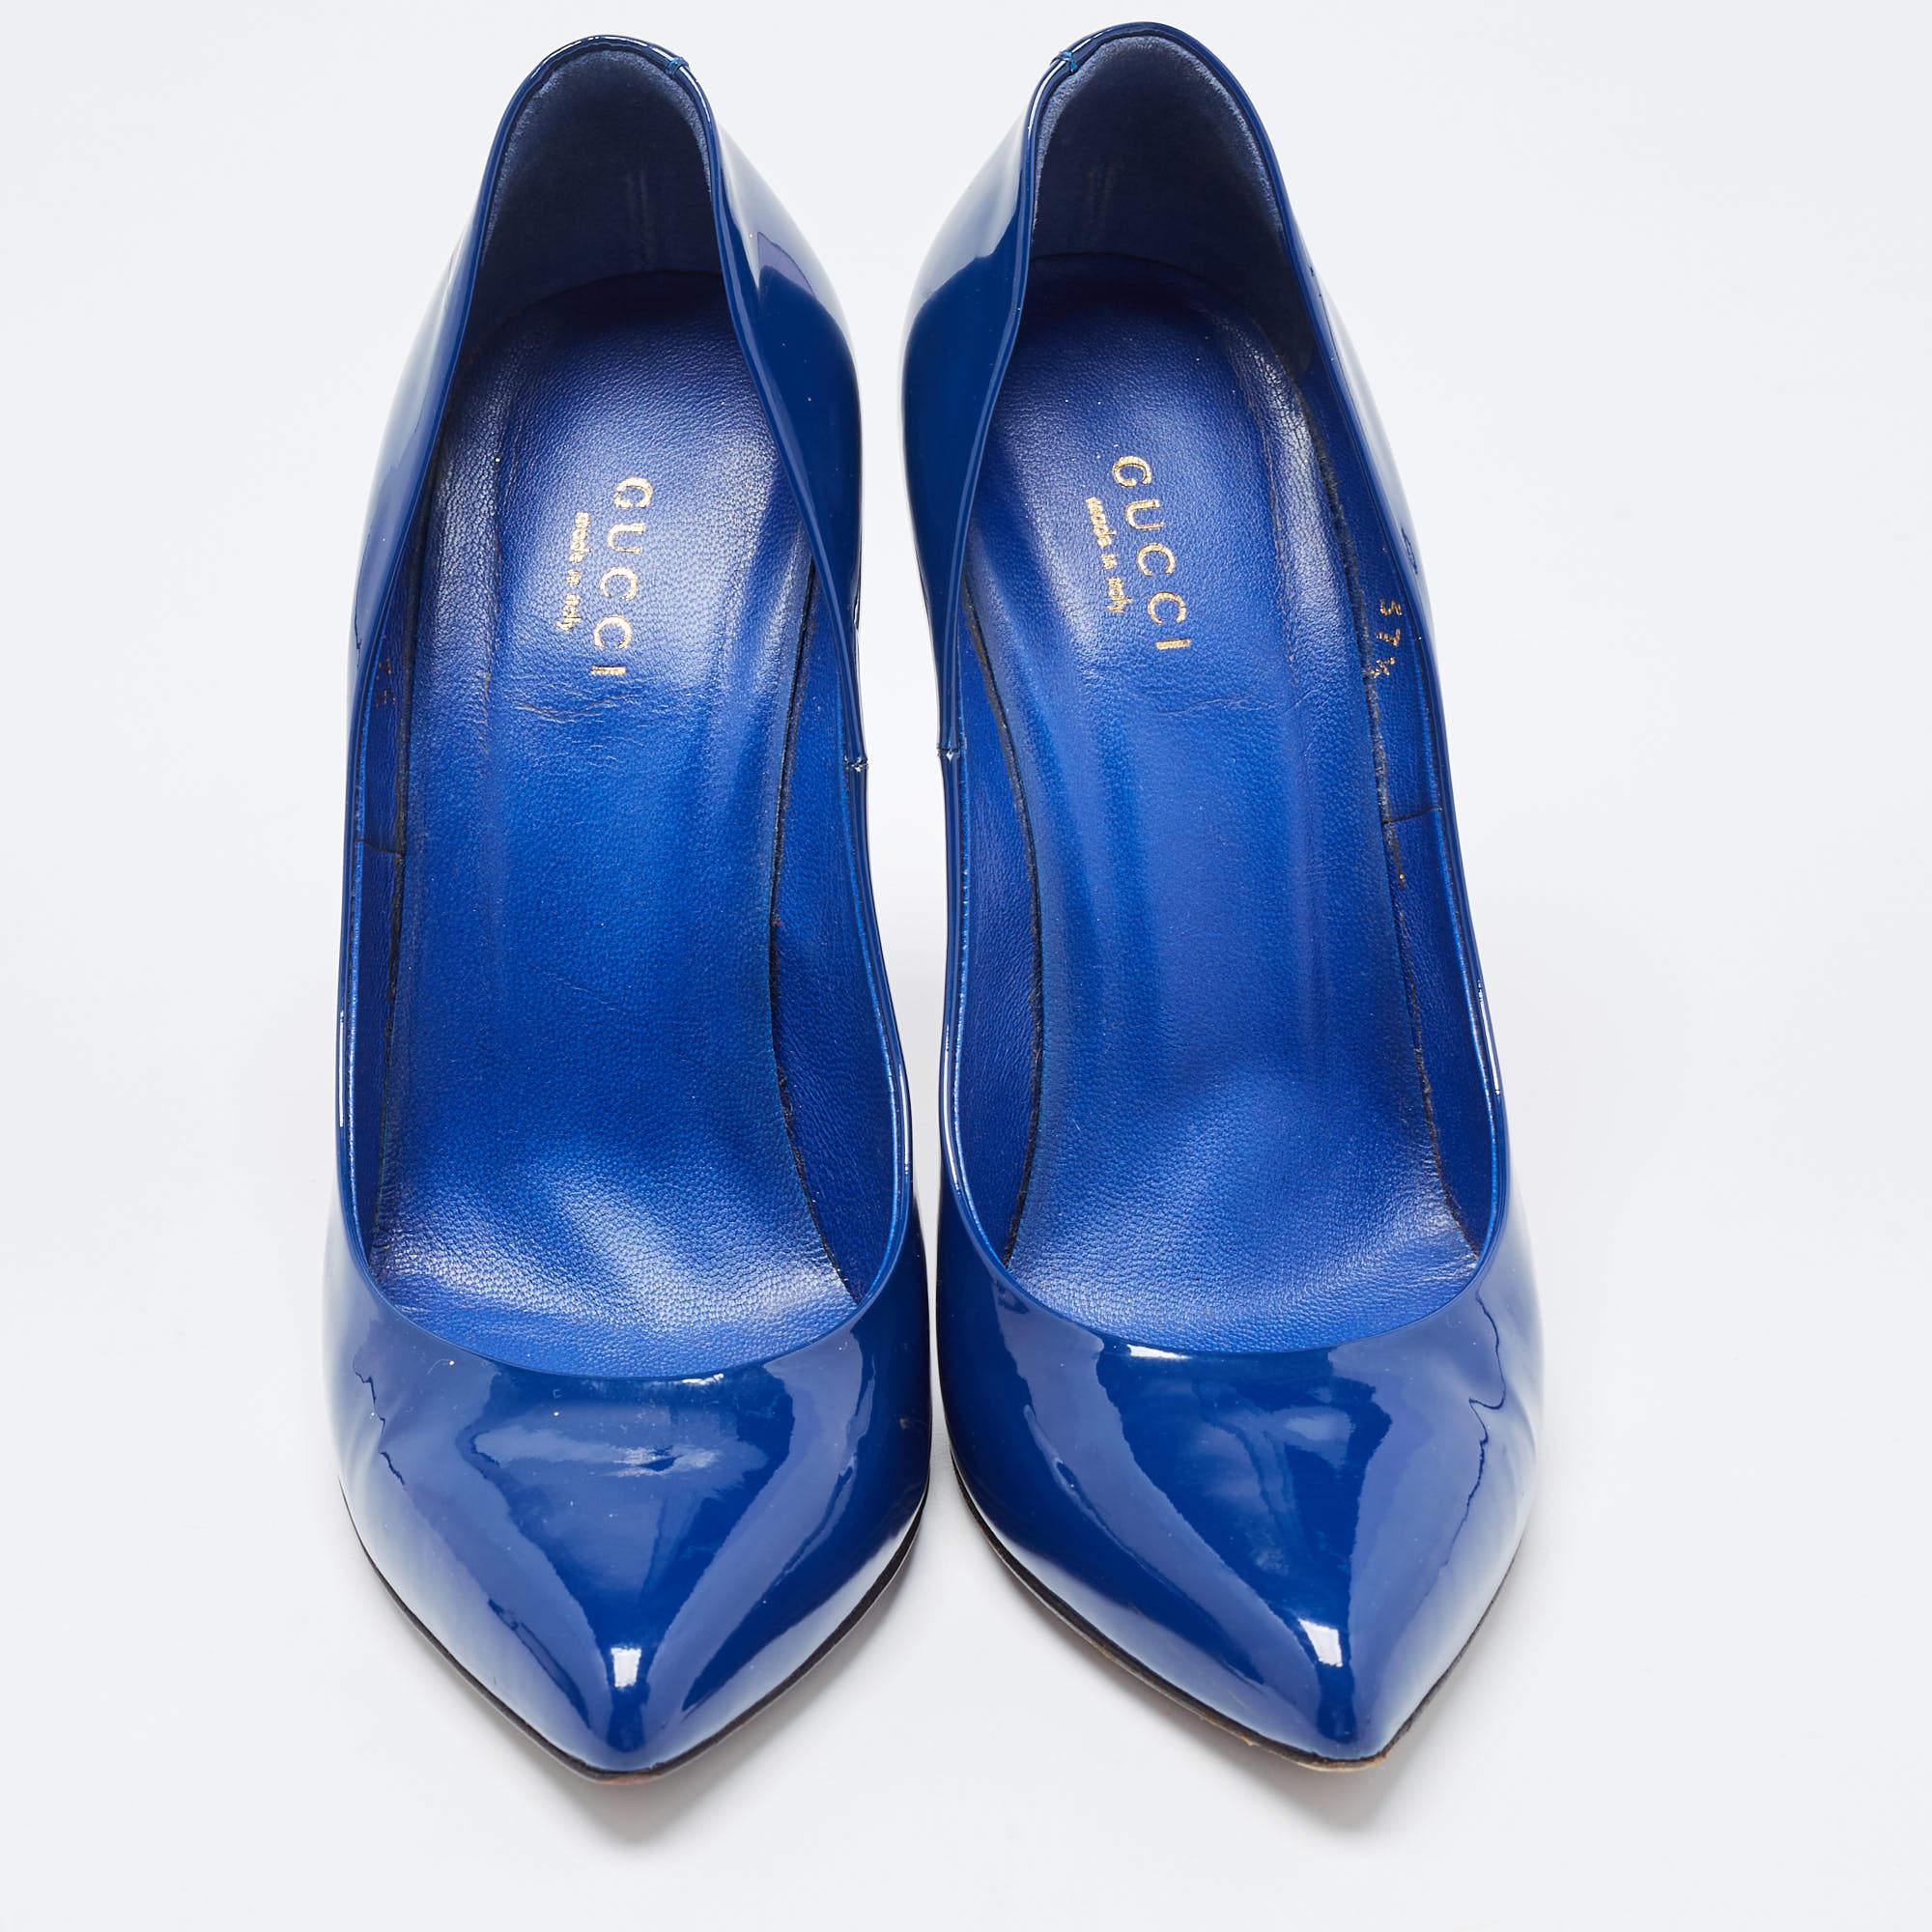 Gucci Royal Blue Patent Leather Pointed Toe Pumps Size 37.5 In Good Condition For Sale In Dubai, Al Qouz 2